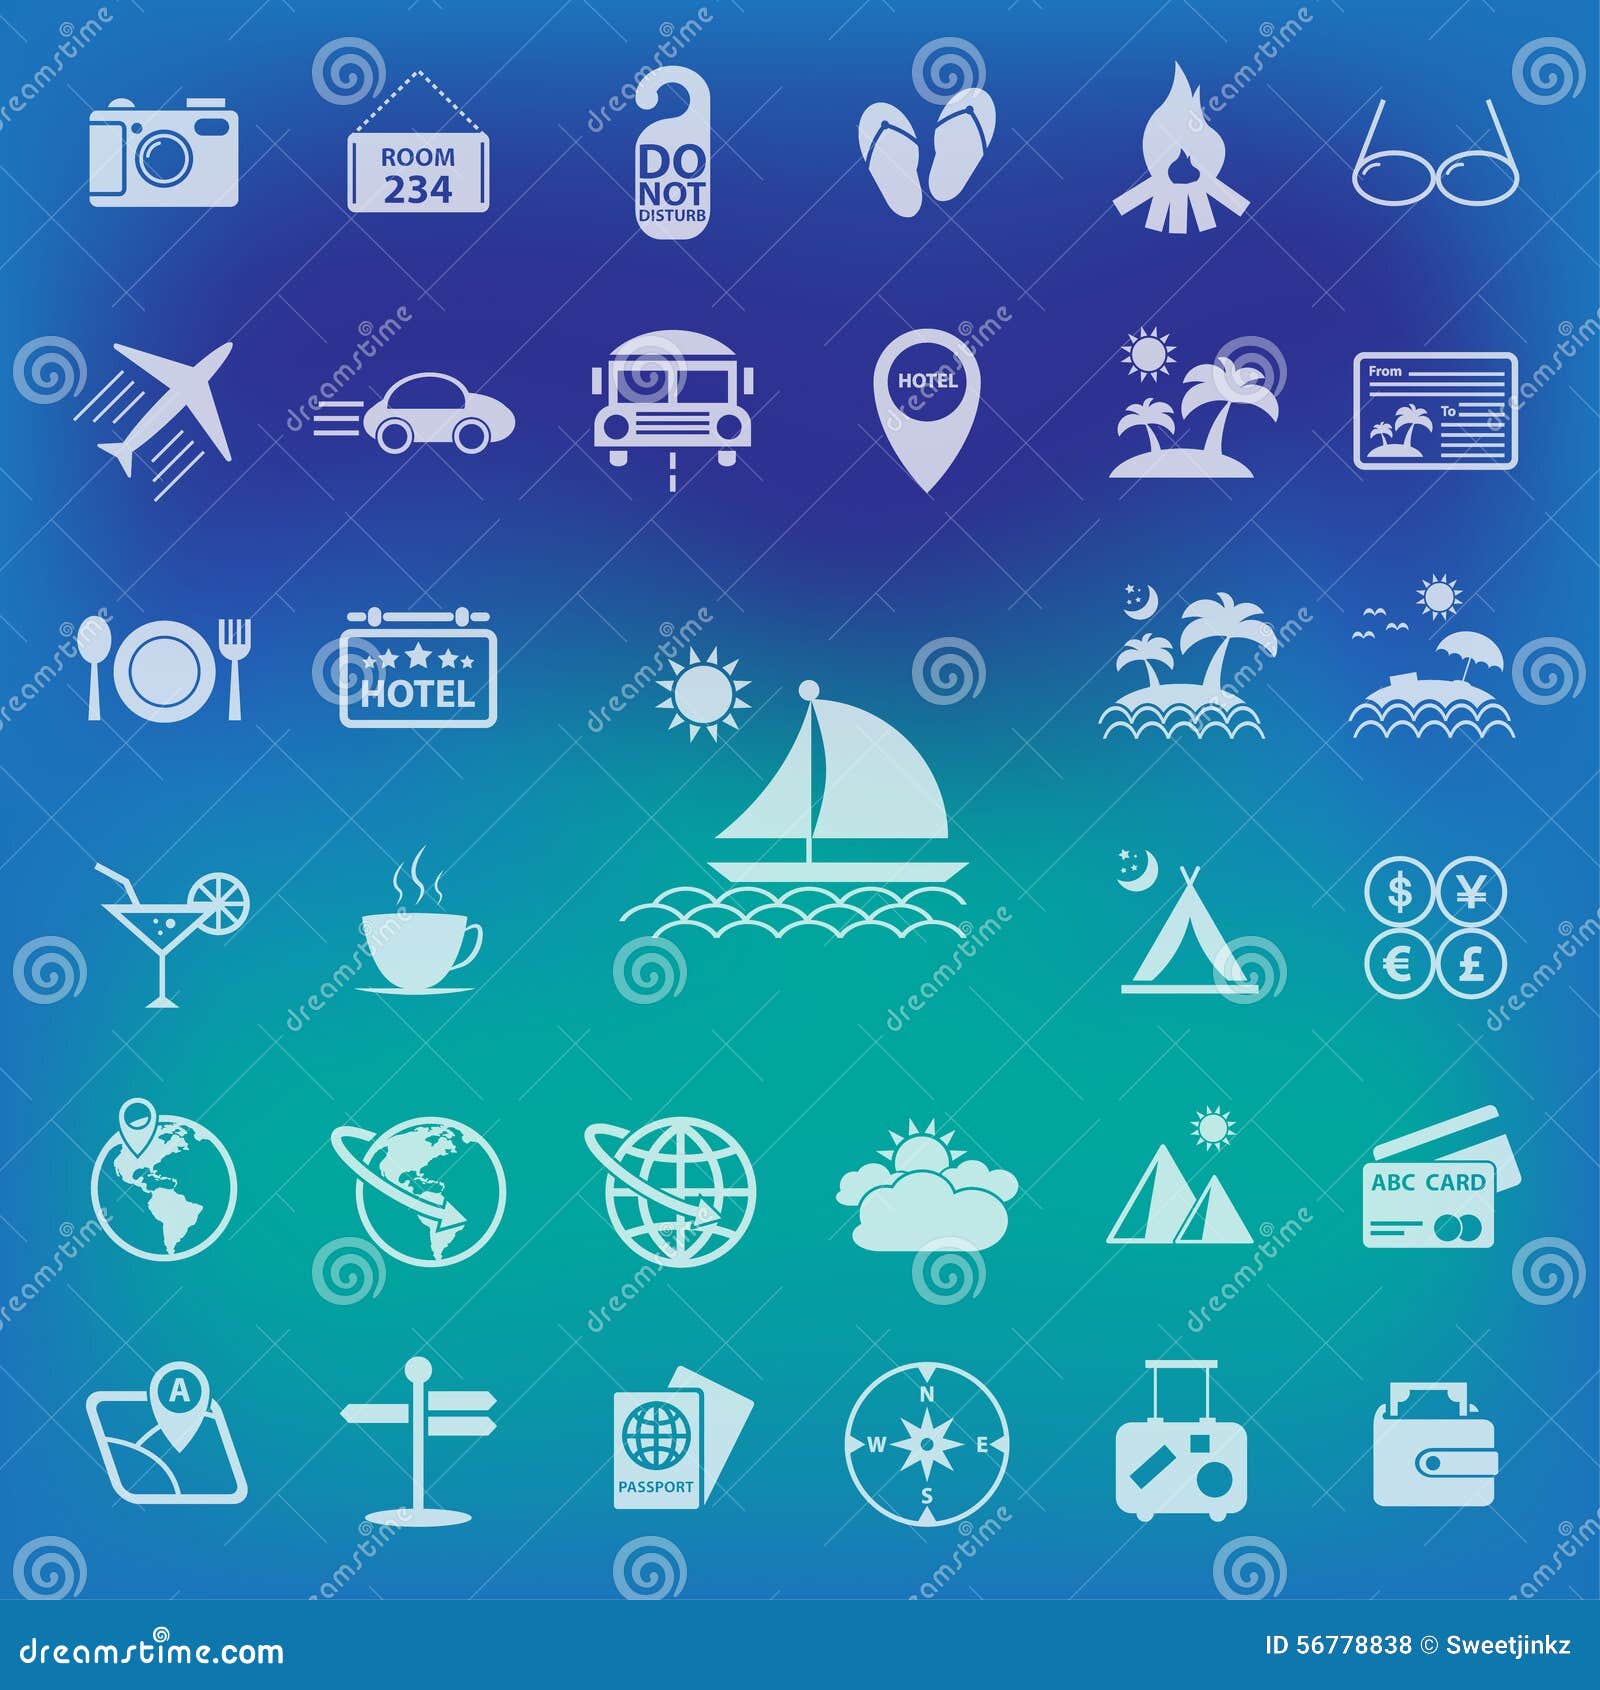 Travel Icons Set.on Blur Background Stock Vector - Illustration of food ...